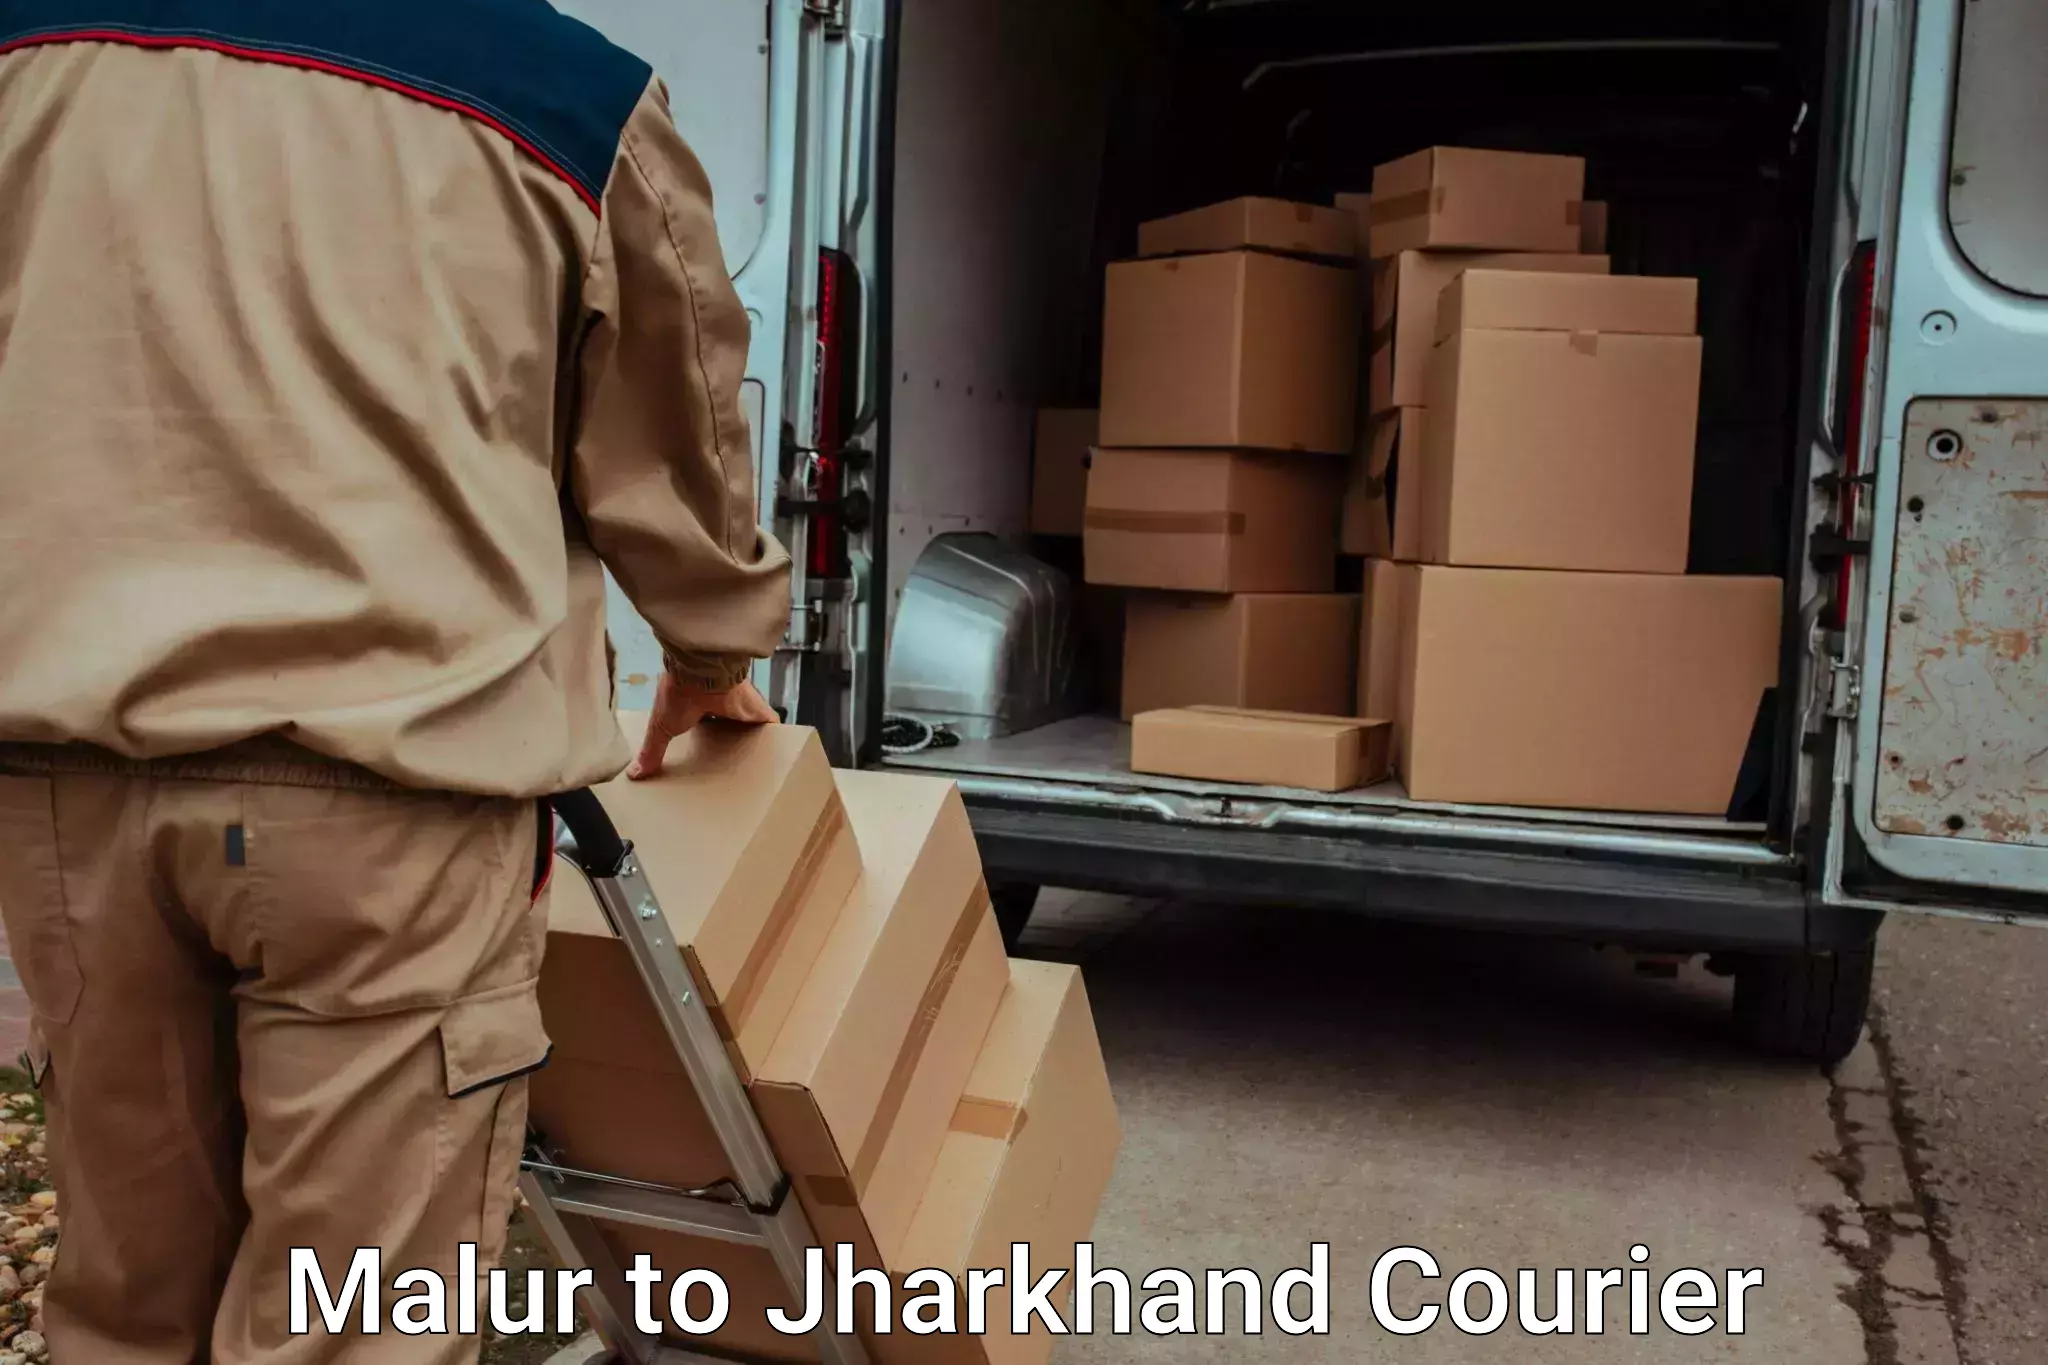 Trusted relocation experts in Malur to Medininagar